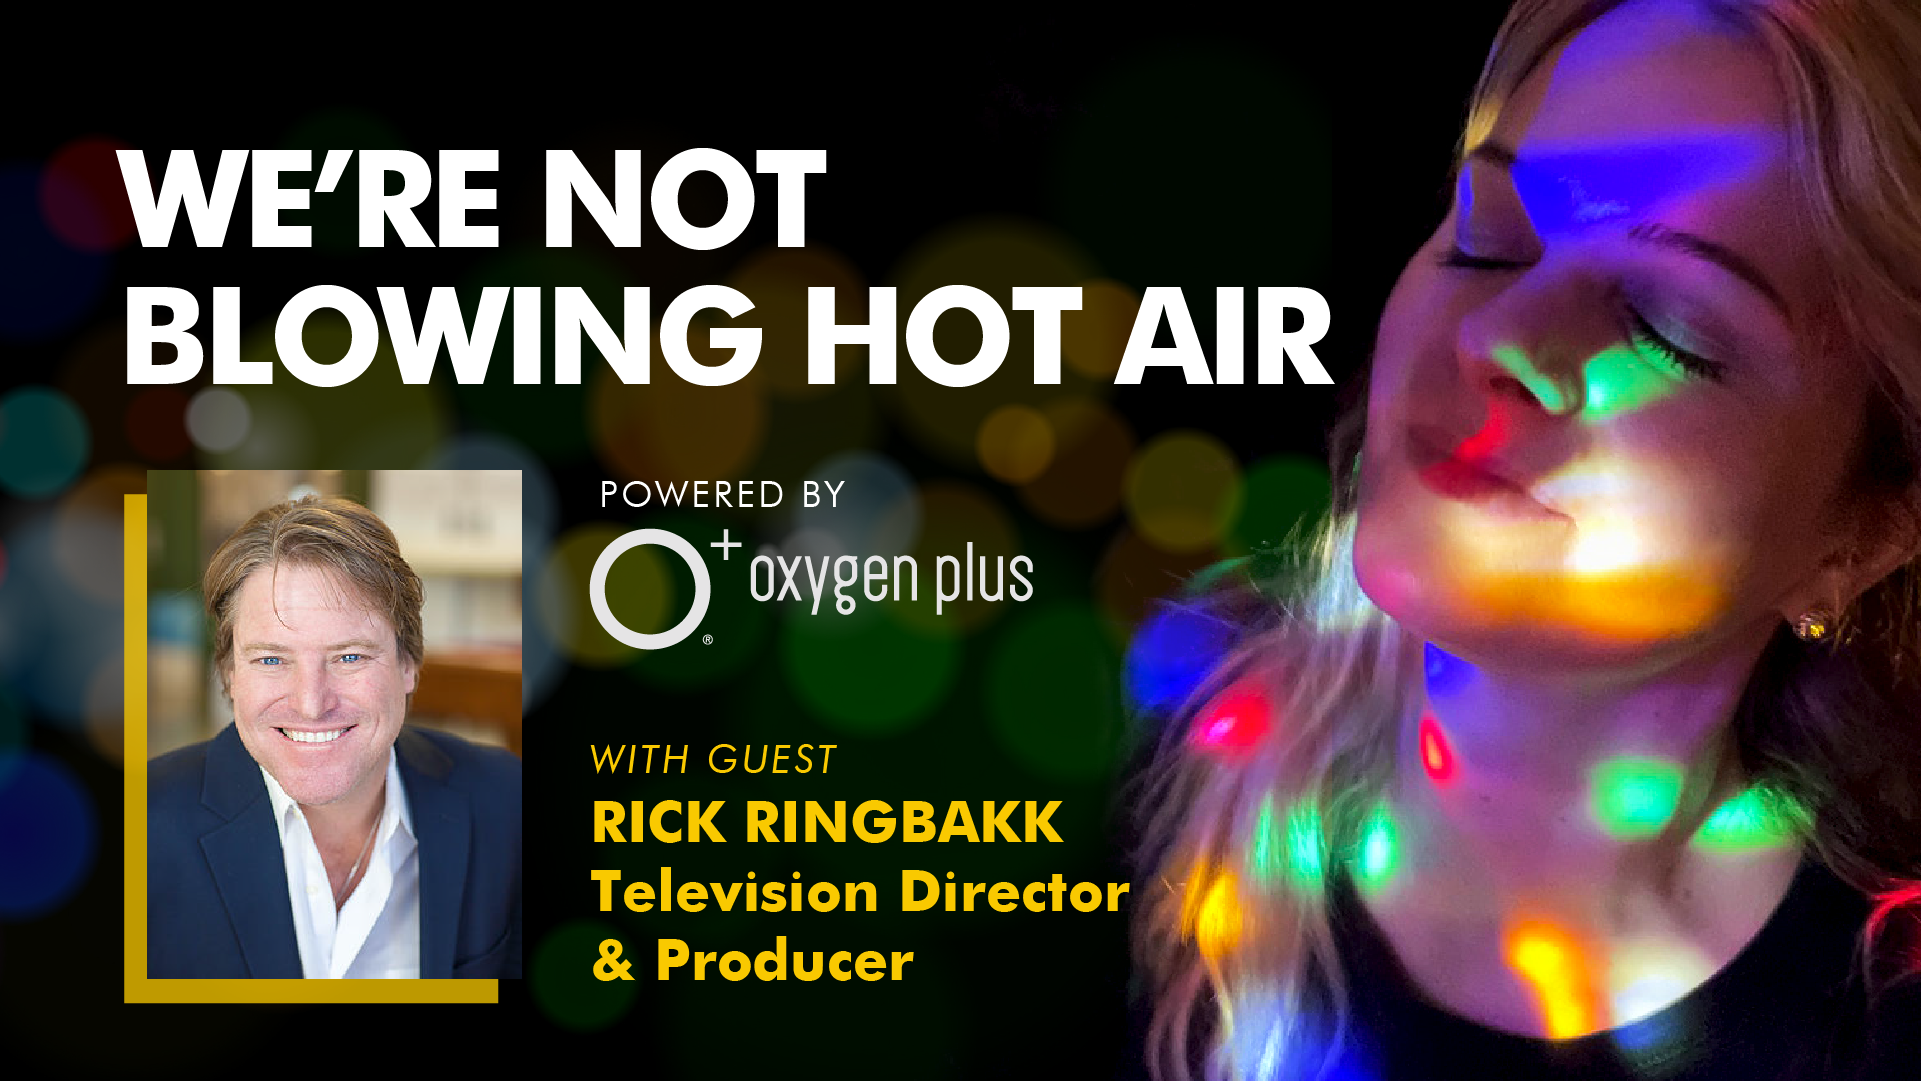 S4E01 - "What Is Love?" with Rick Ringbakk, TV producer and primetime Emmy-winner of 'The Amazing Race”